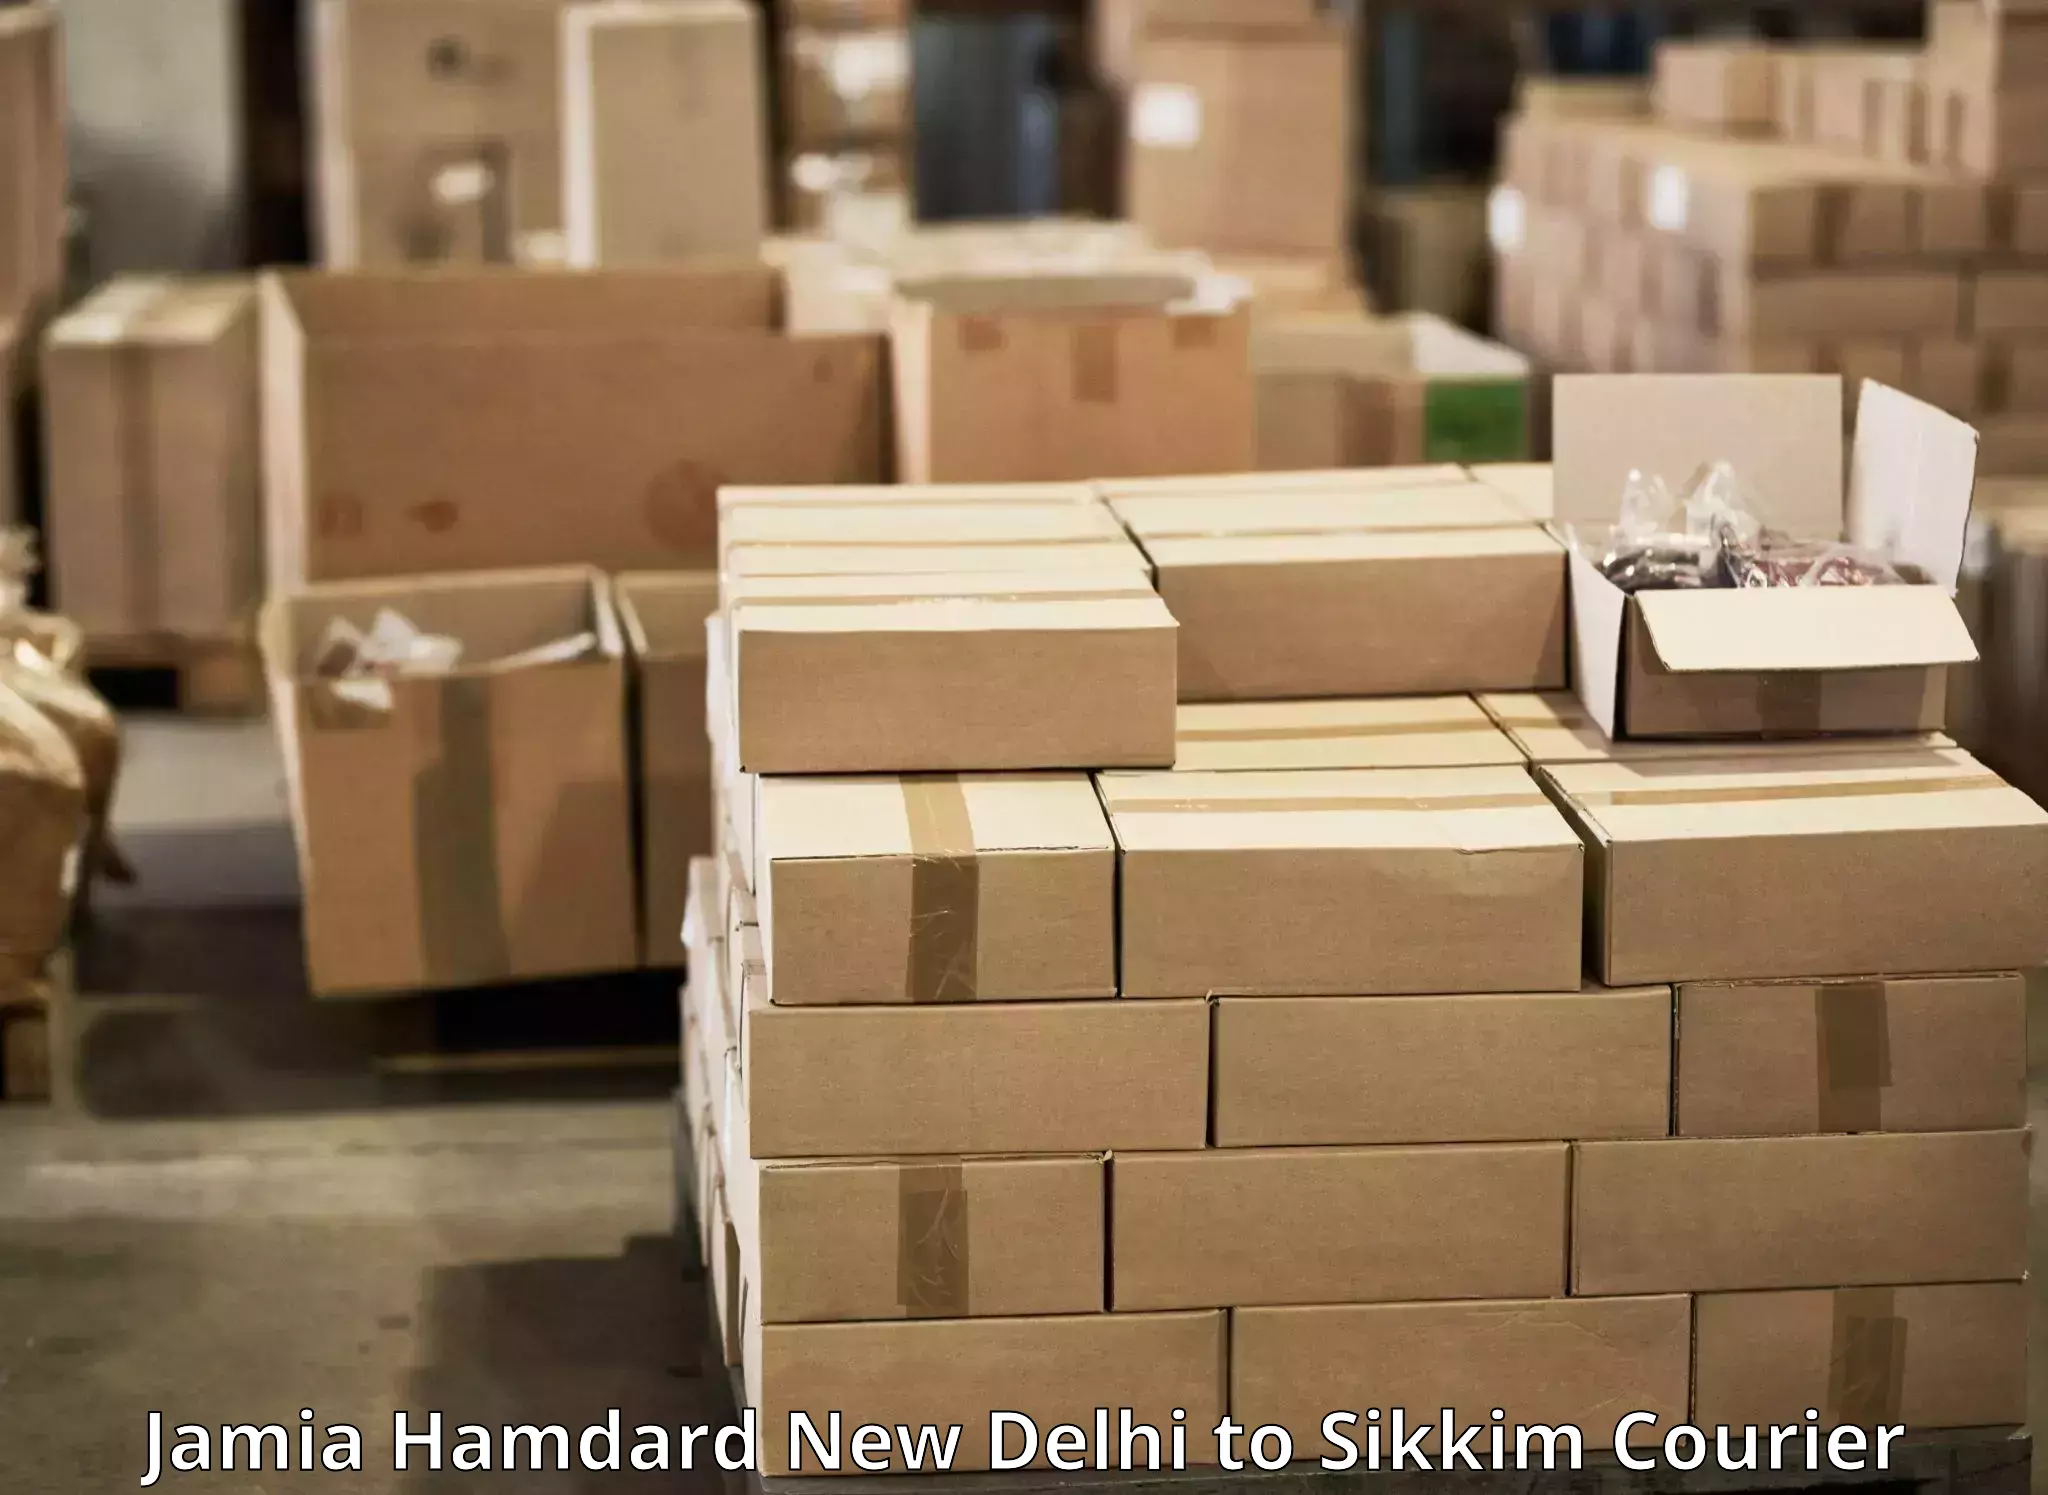 Expedited parcel delivery Jamia Hamdard New Delhi to Pelling